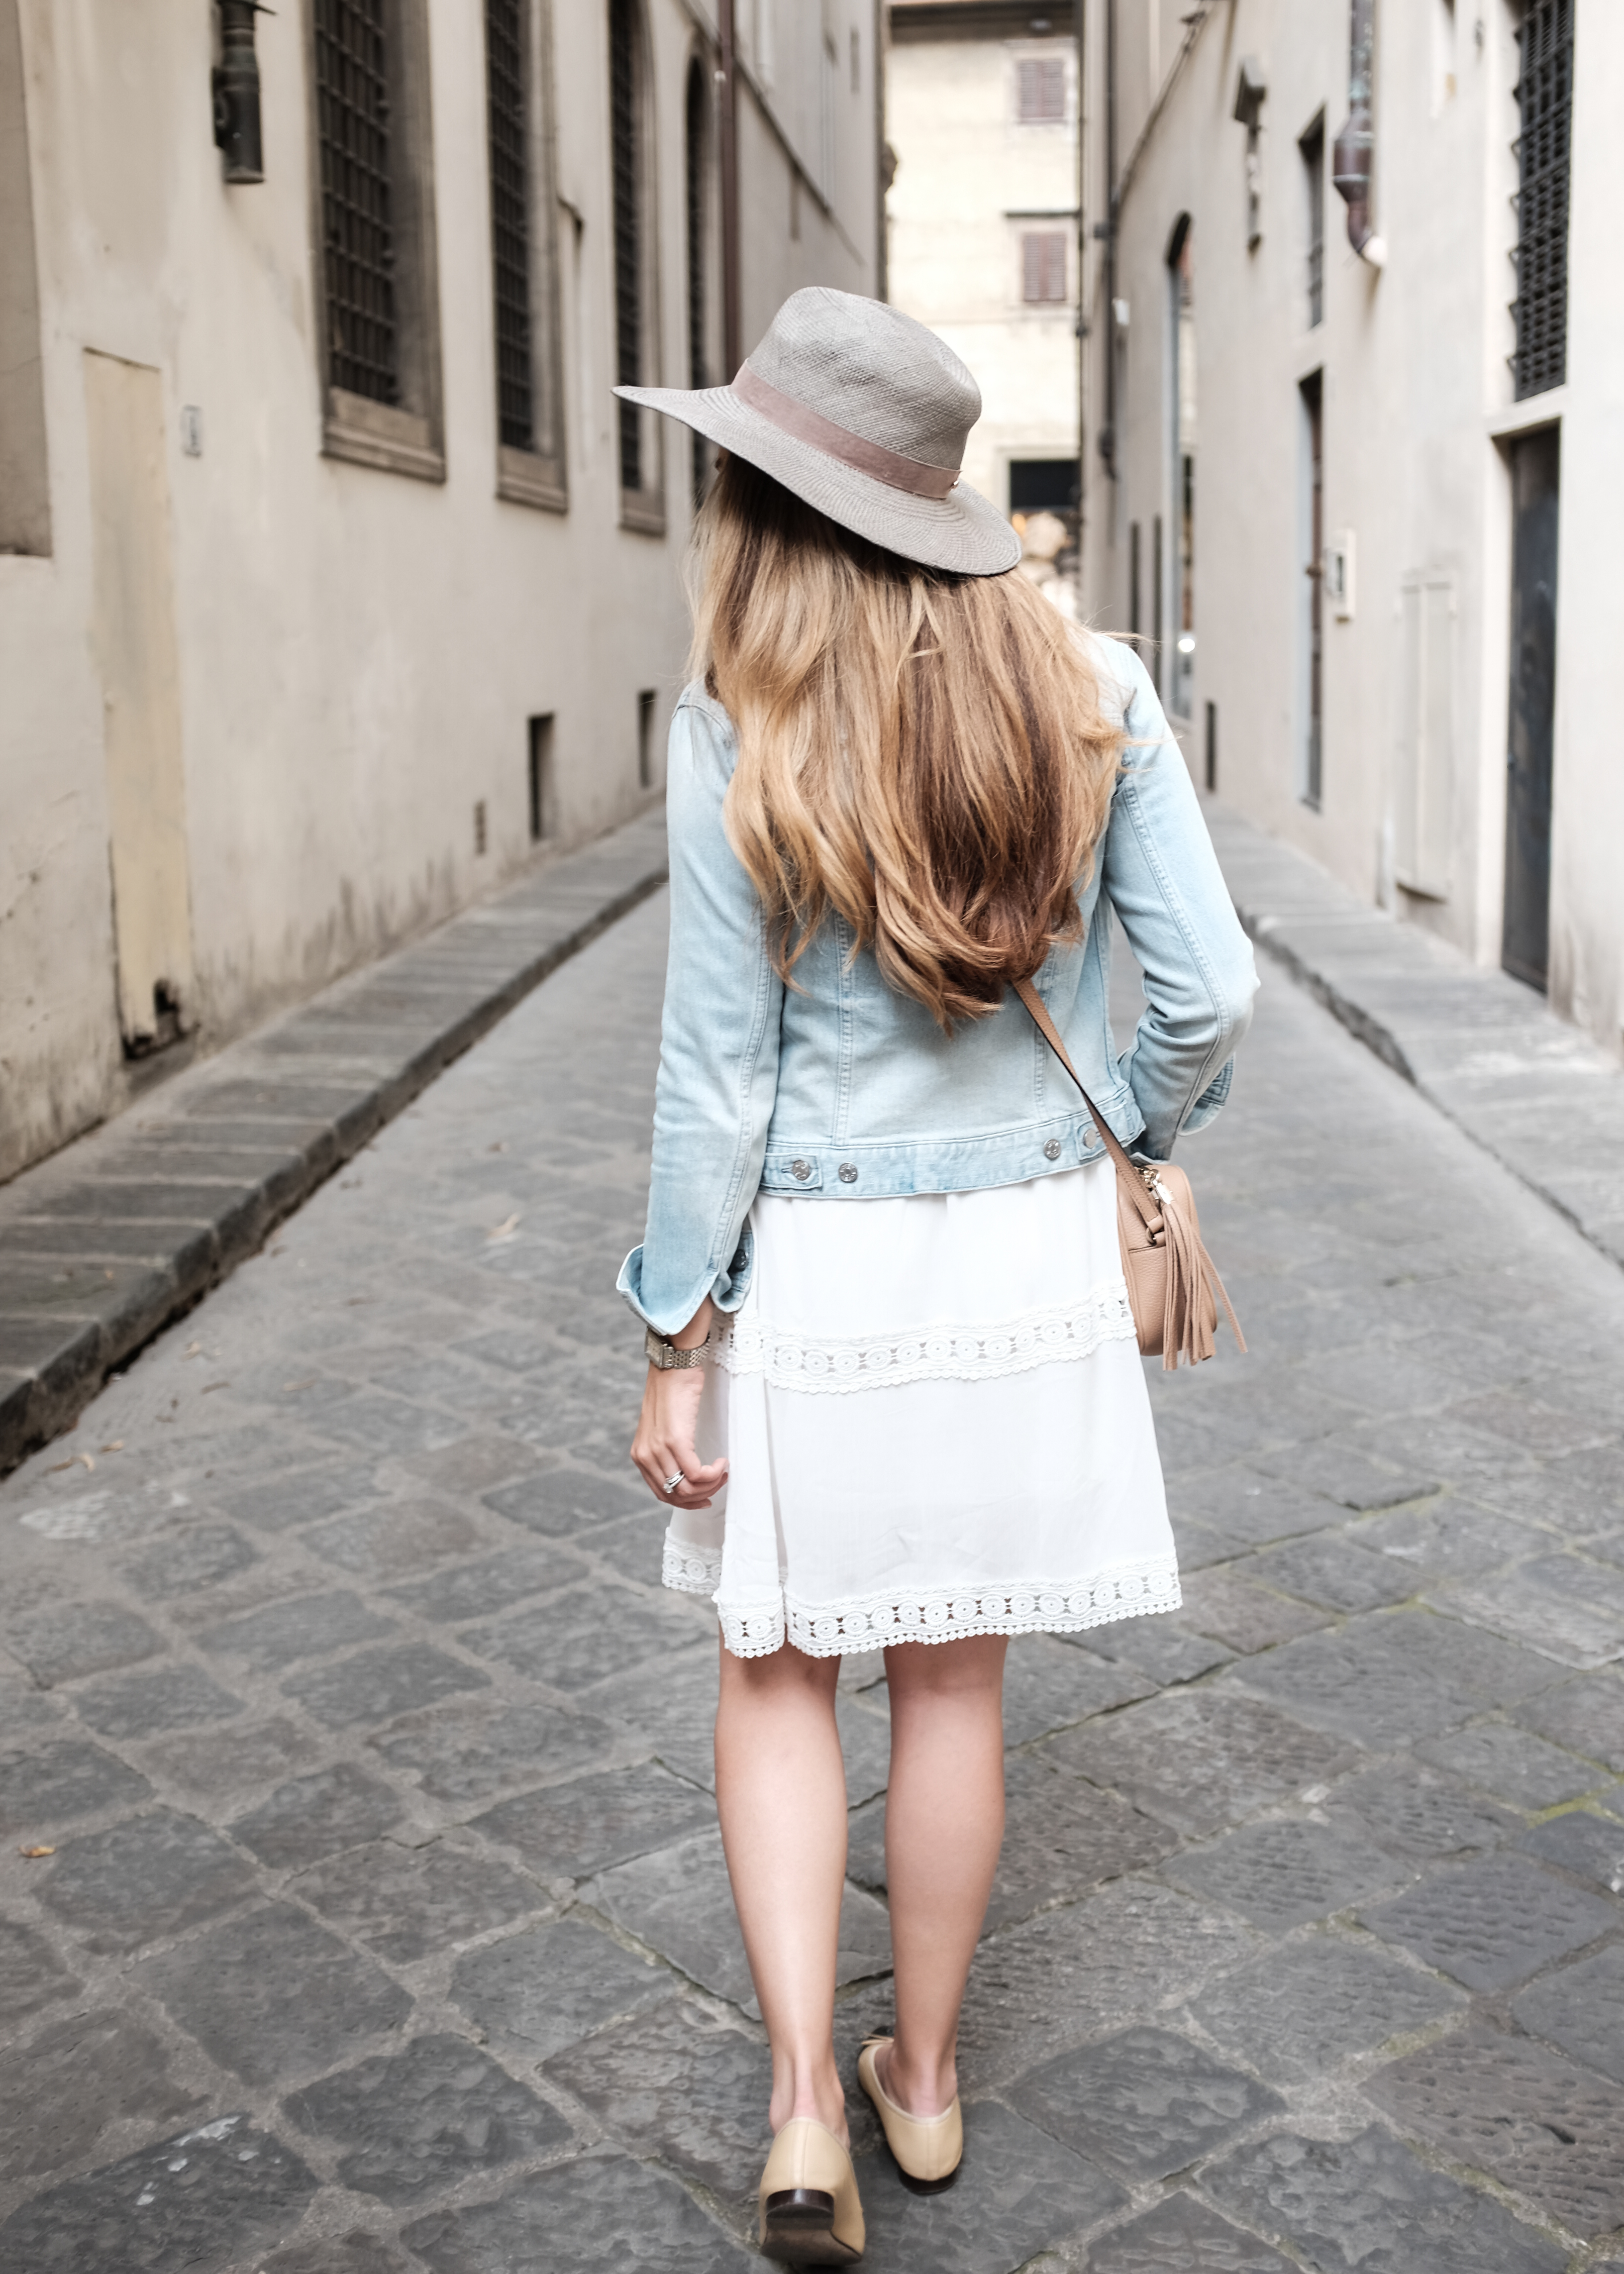 Denim Jacket with Summer Dress Outfit Ideas 